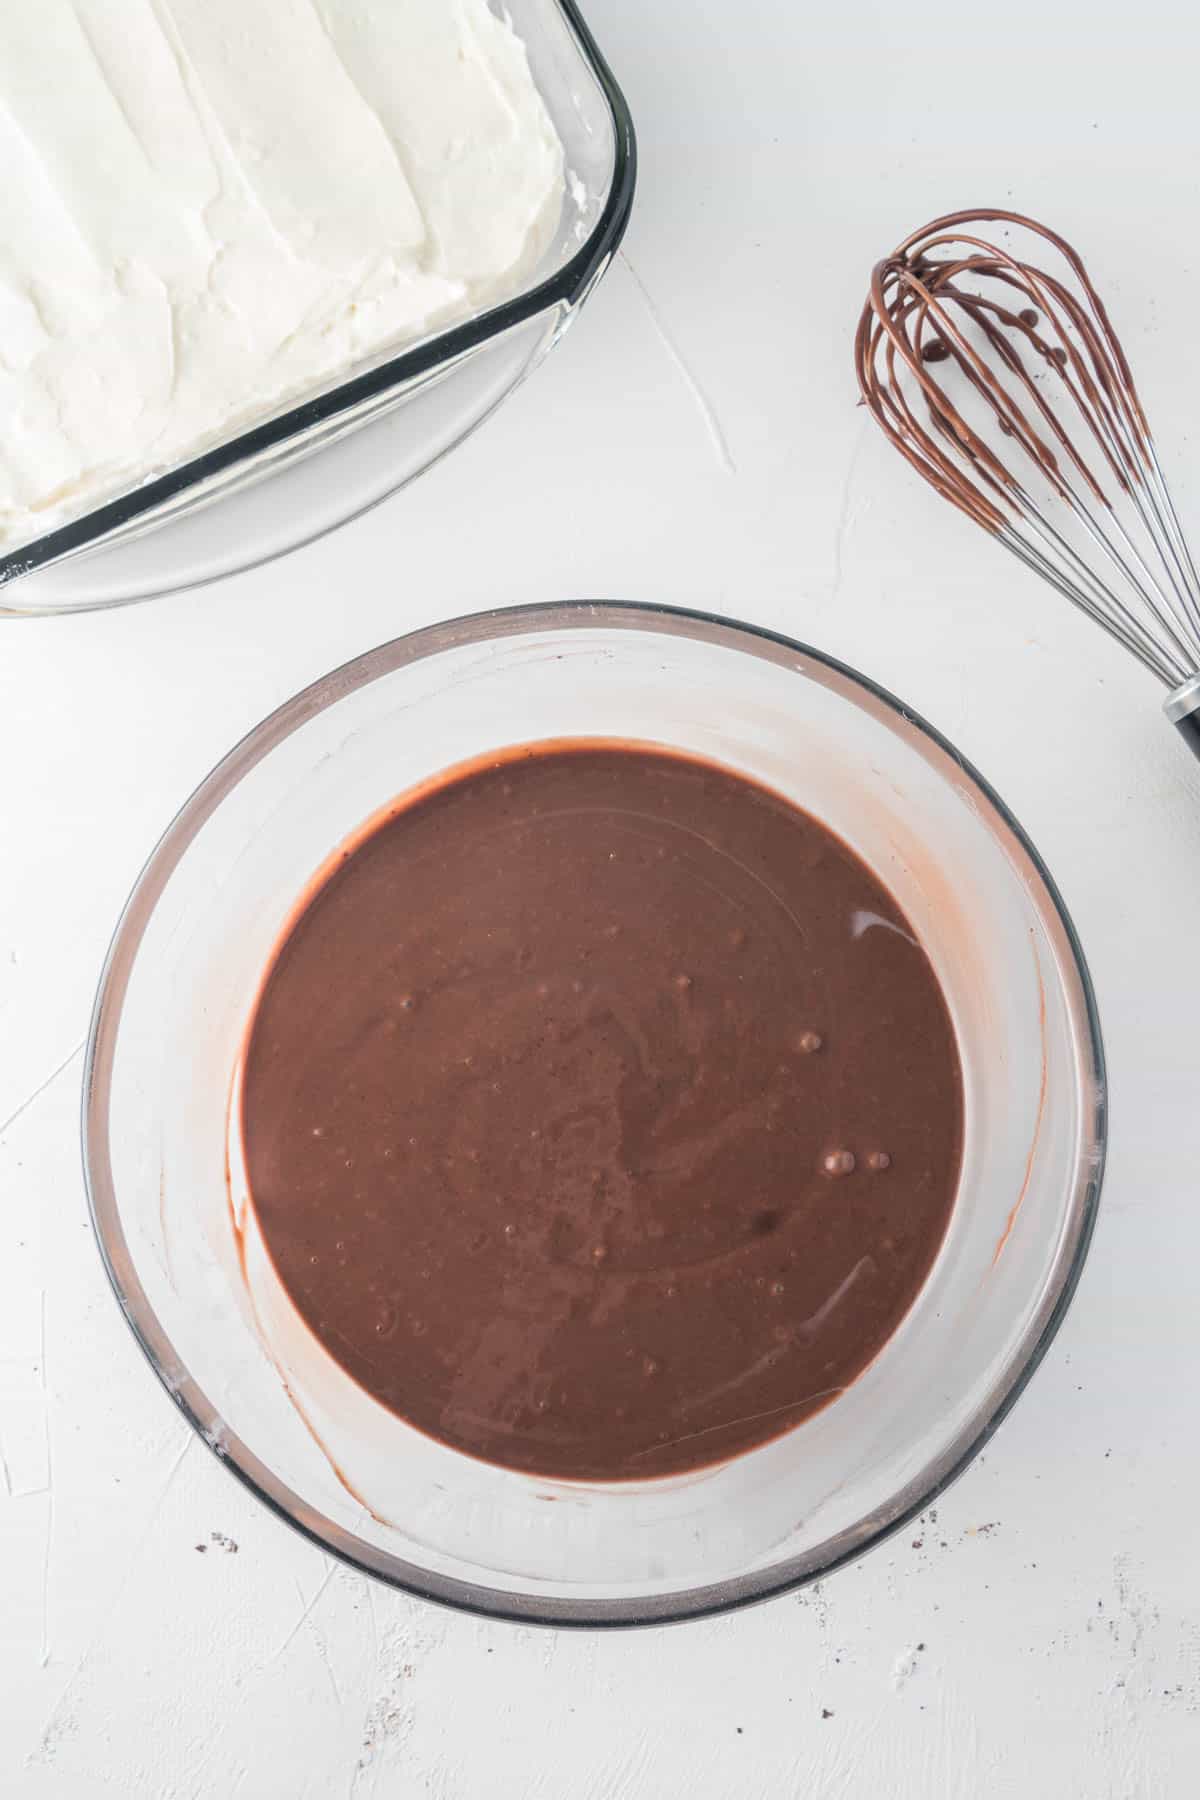 Chocolate pudding in a mixing bowl.